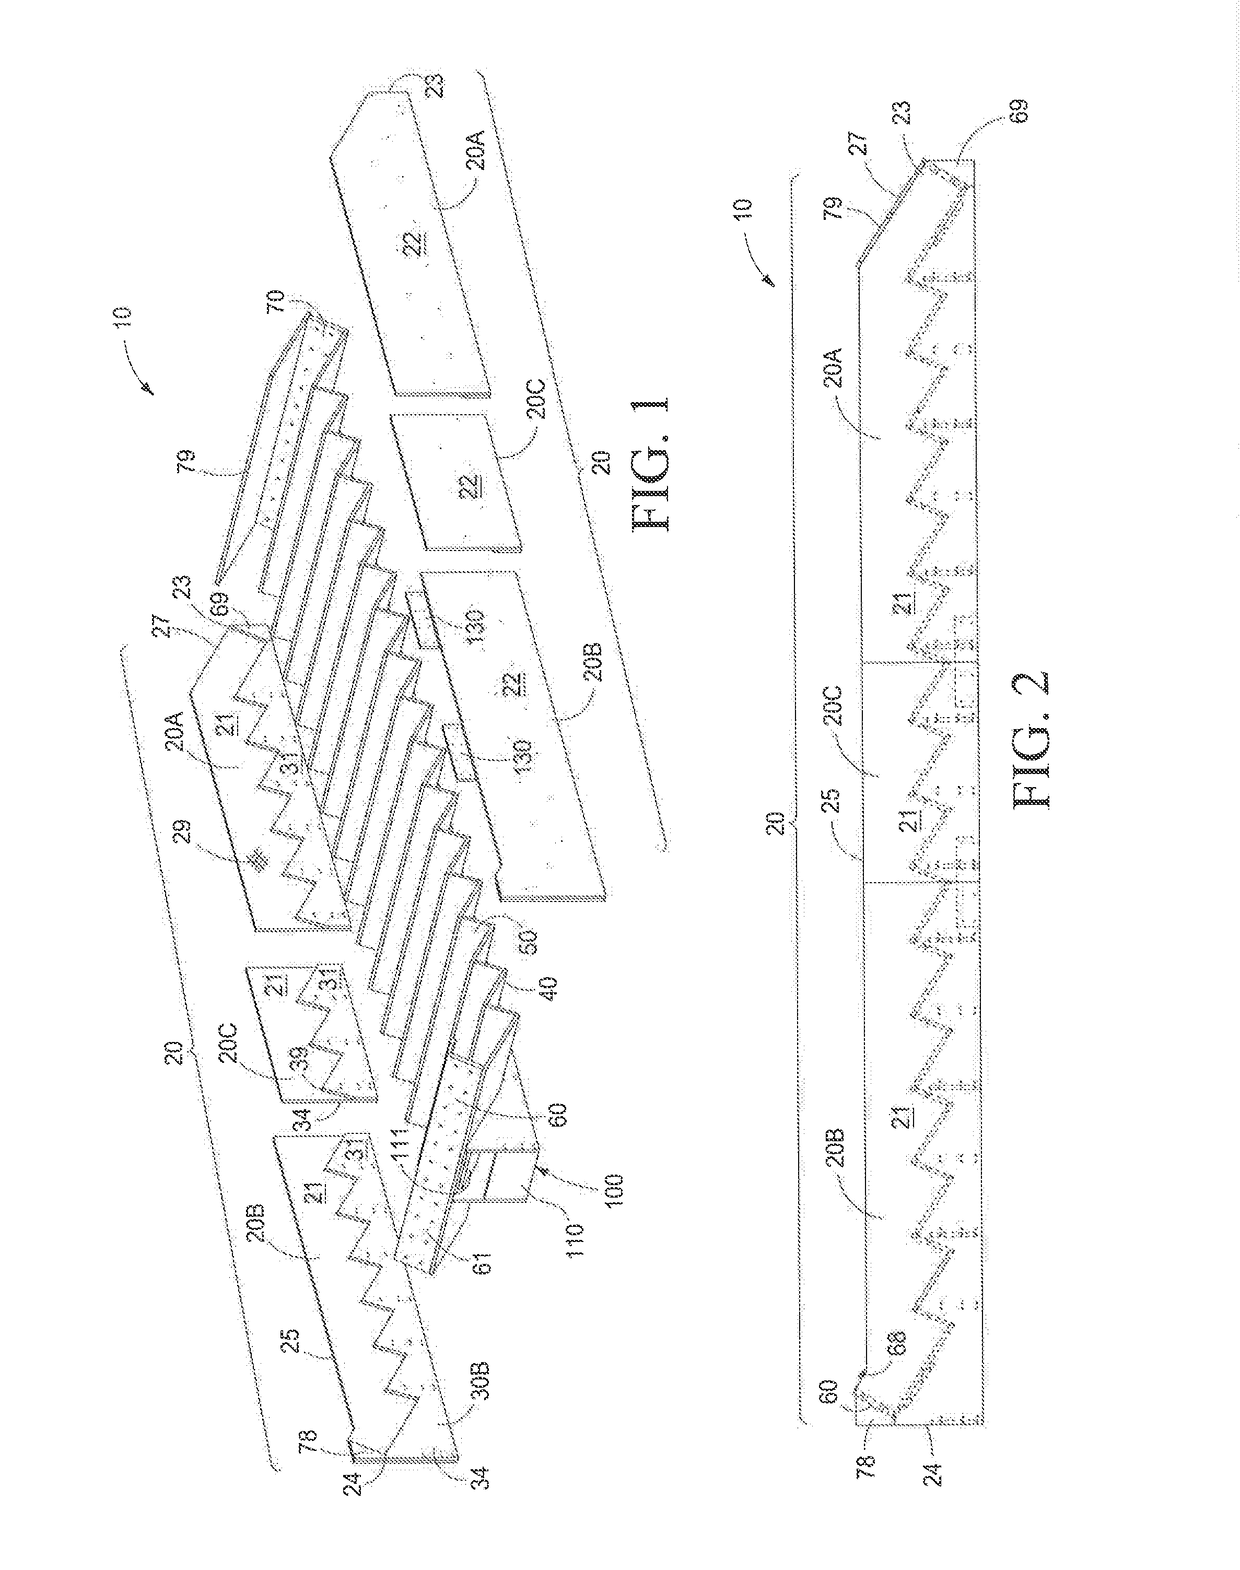 Method and apparatus for production of precision precast concrete flights of stairs